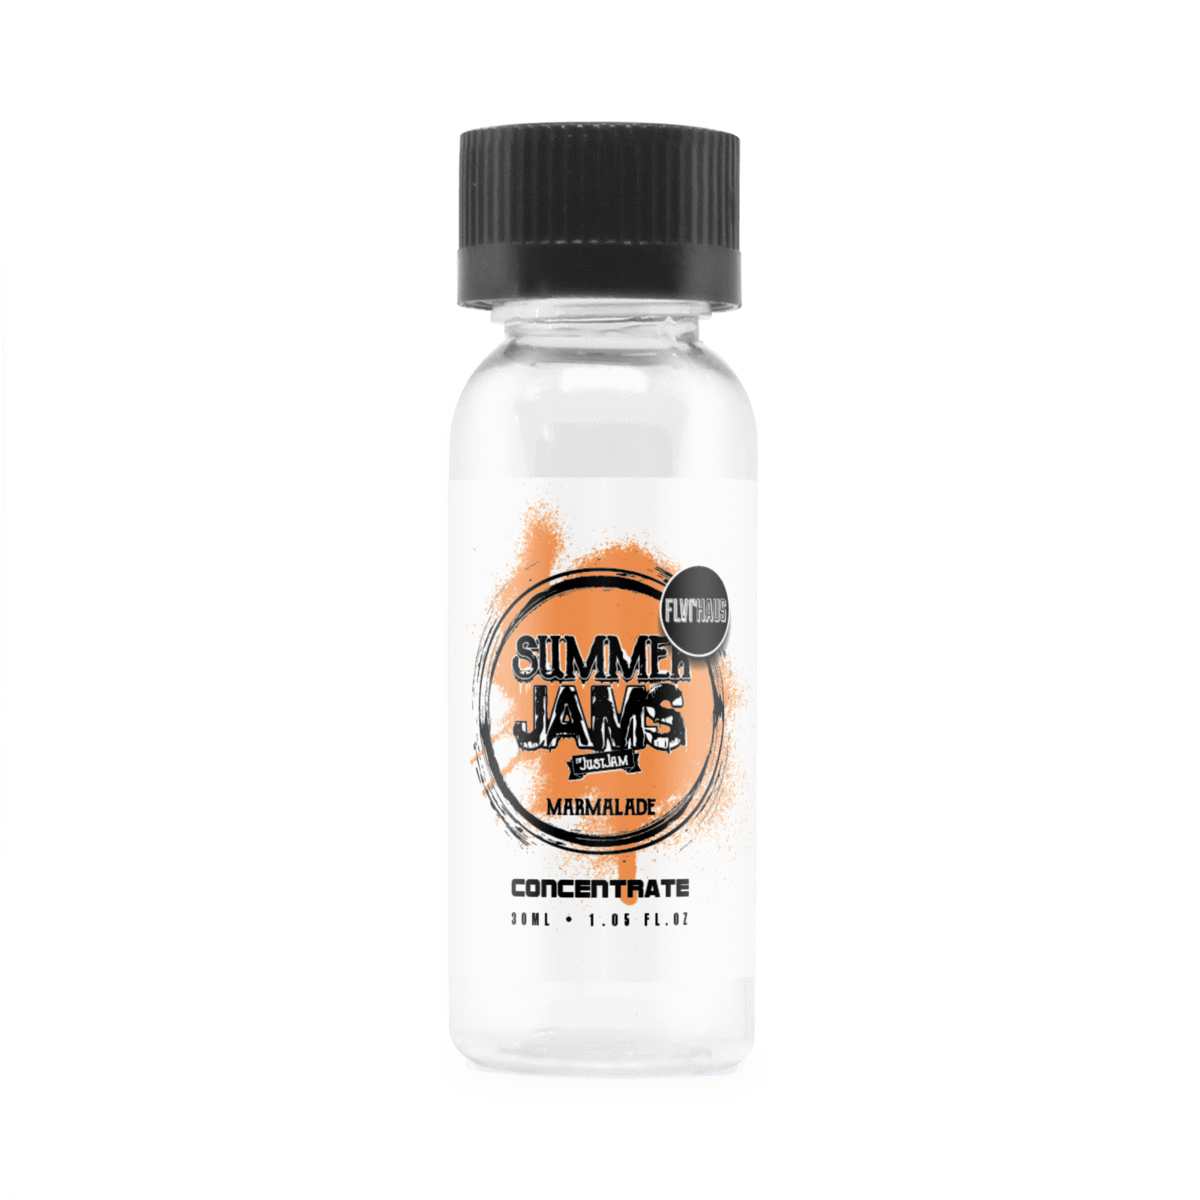 Marmalade Summer Concentrate E-liquid by Just Jam 30ml